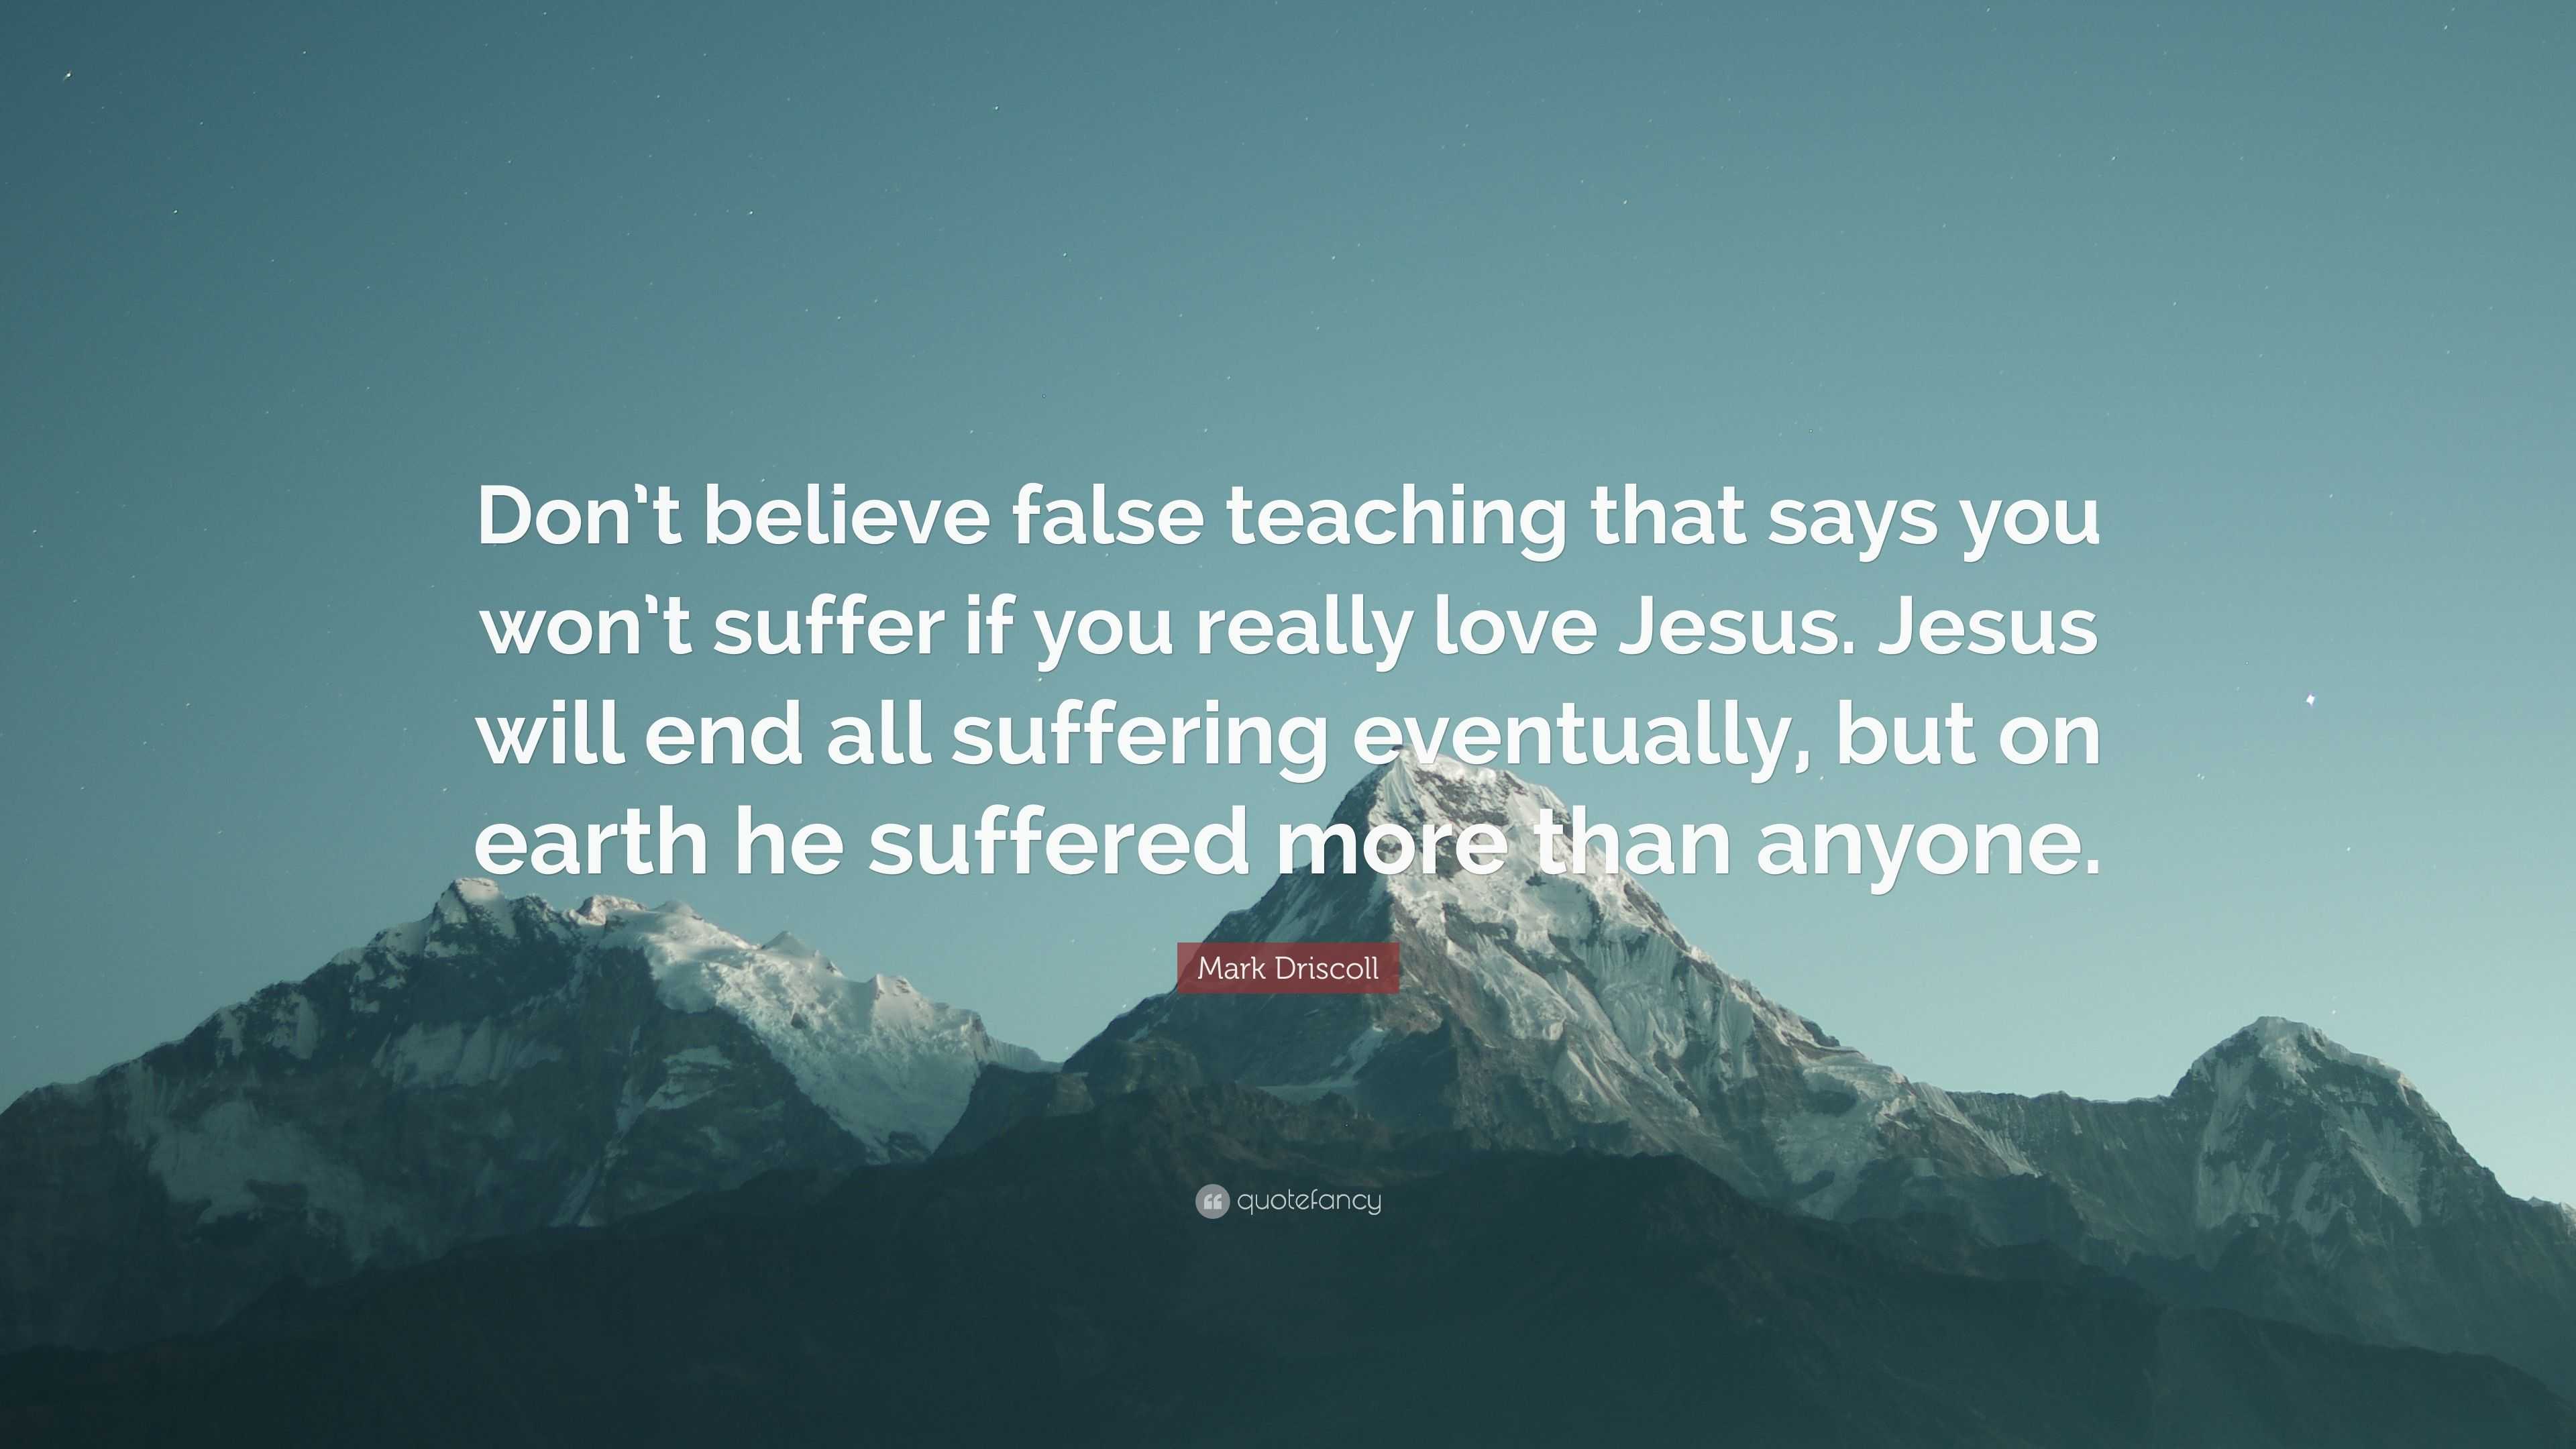 Mark Driscoll Quote “Don t believe false teaching that says you won